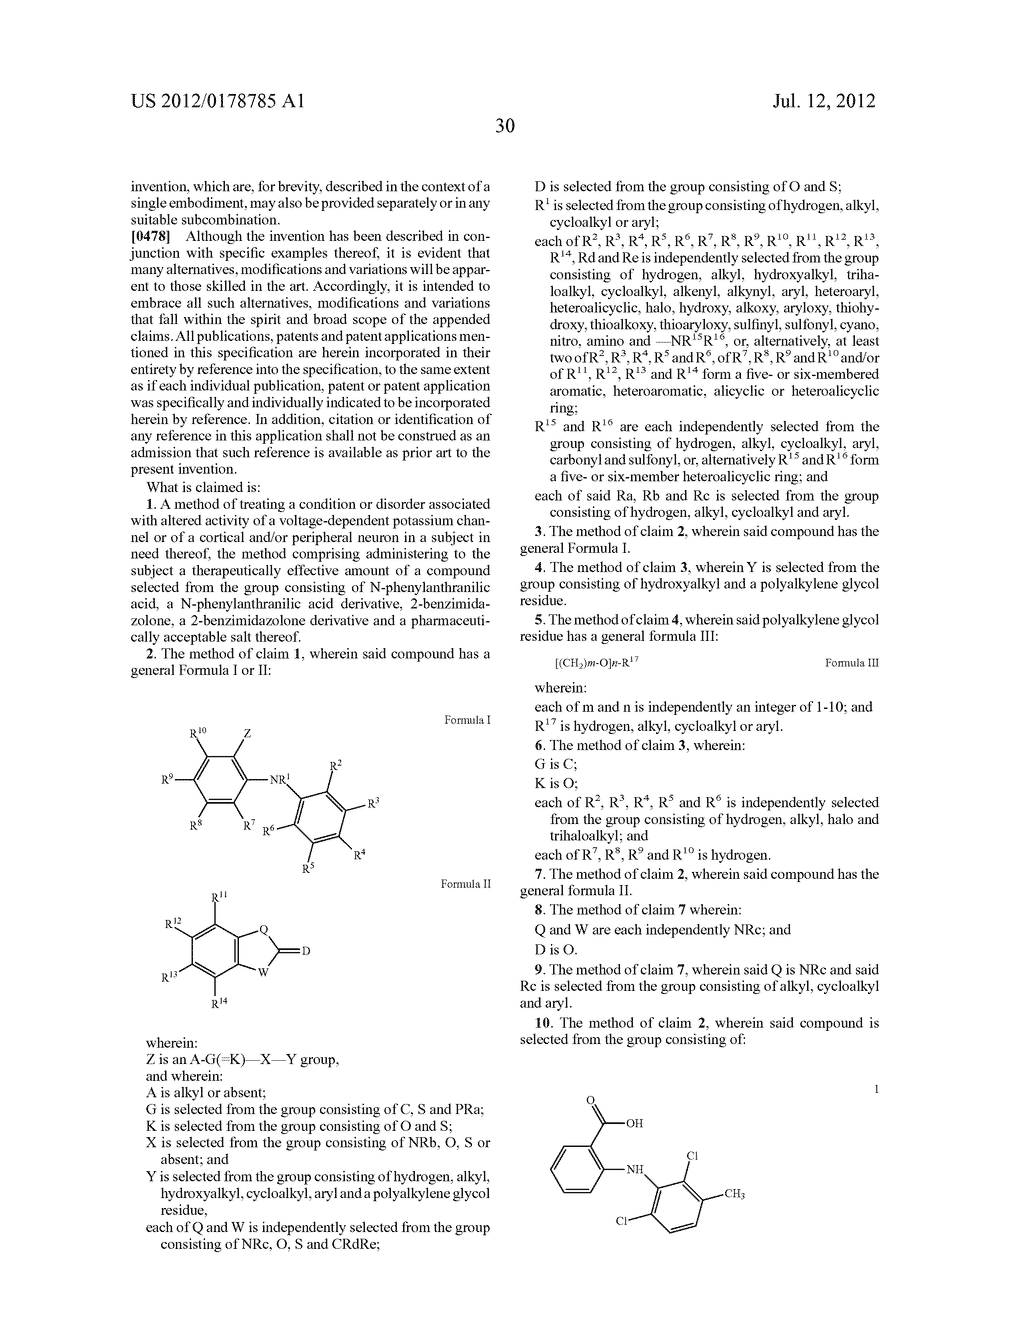 DERIVATIVES OF N-PHENYLANTHRANILIC ACID AND 2-BENZIMIDAZOLONE AS POTASSIUM     CHANNEL AND/OR NEURON ACTIVITY MODULATORS - diagram, schematic, and image 62